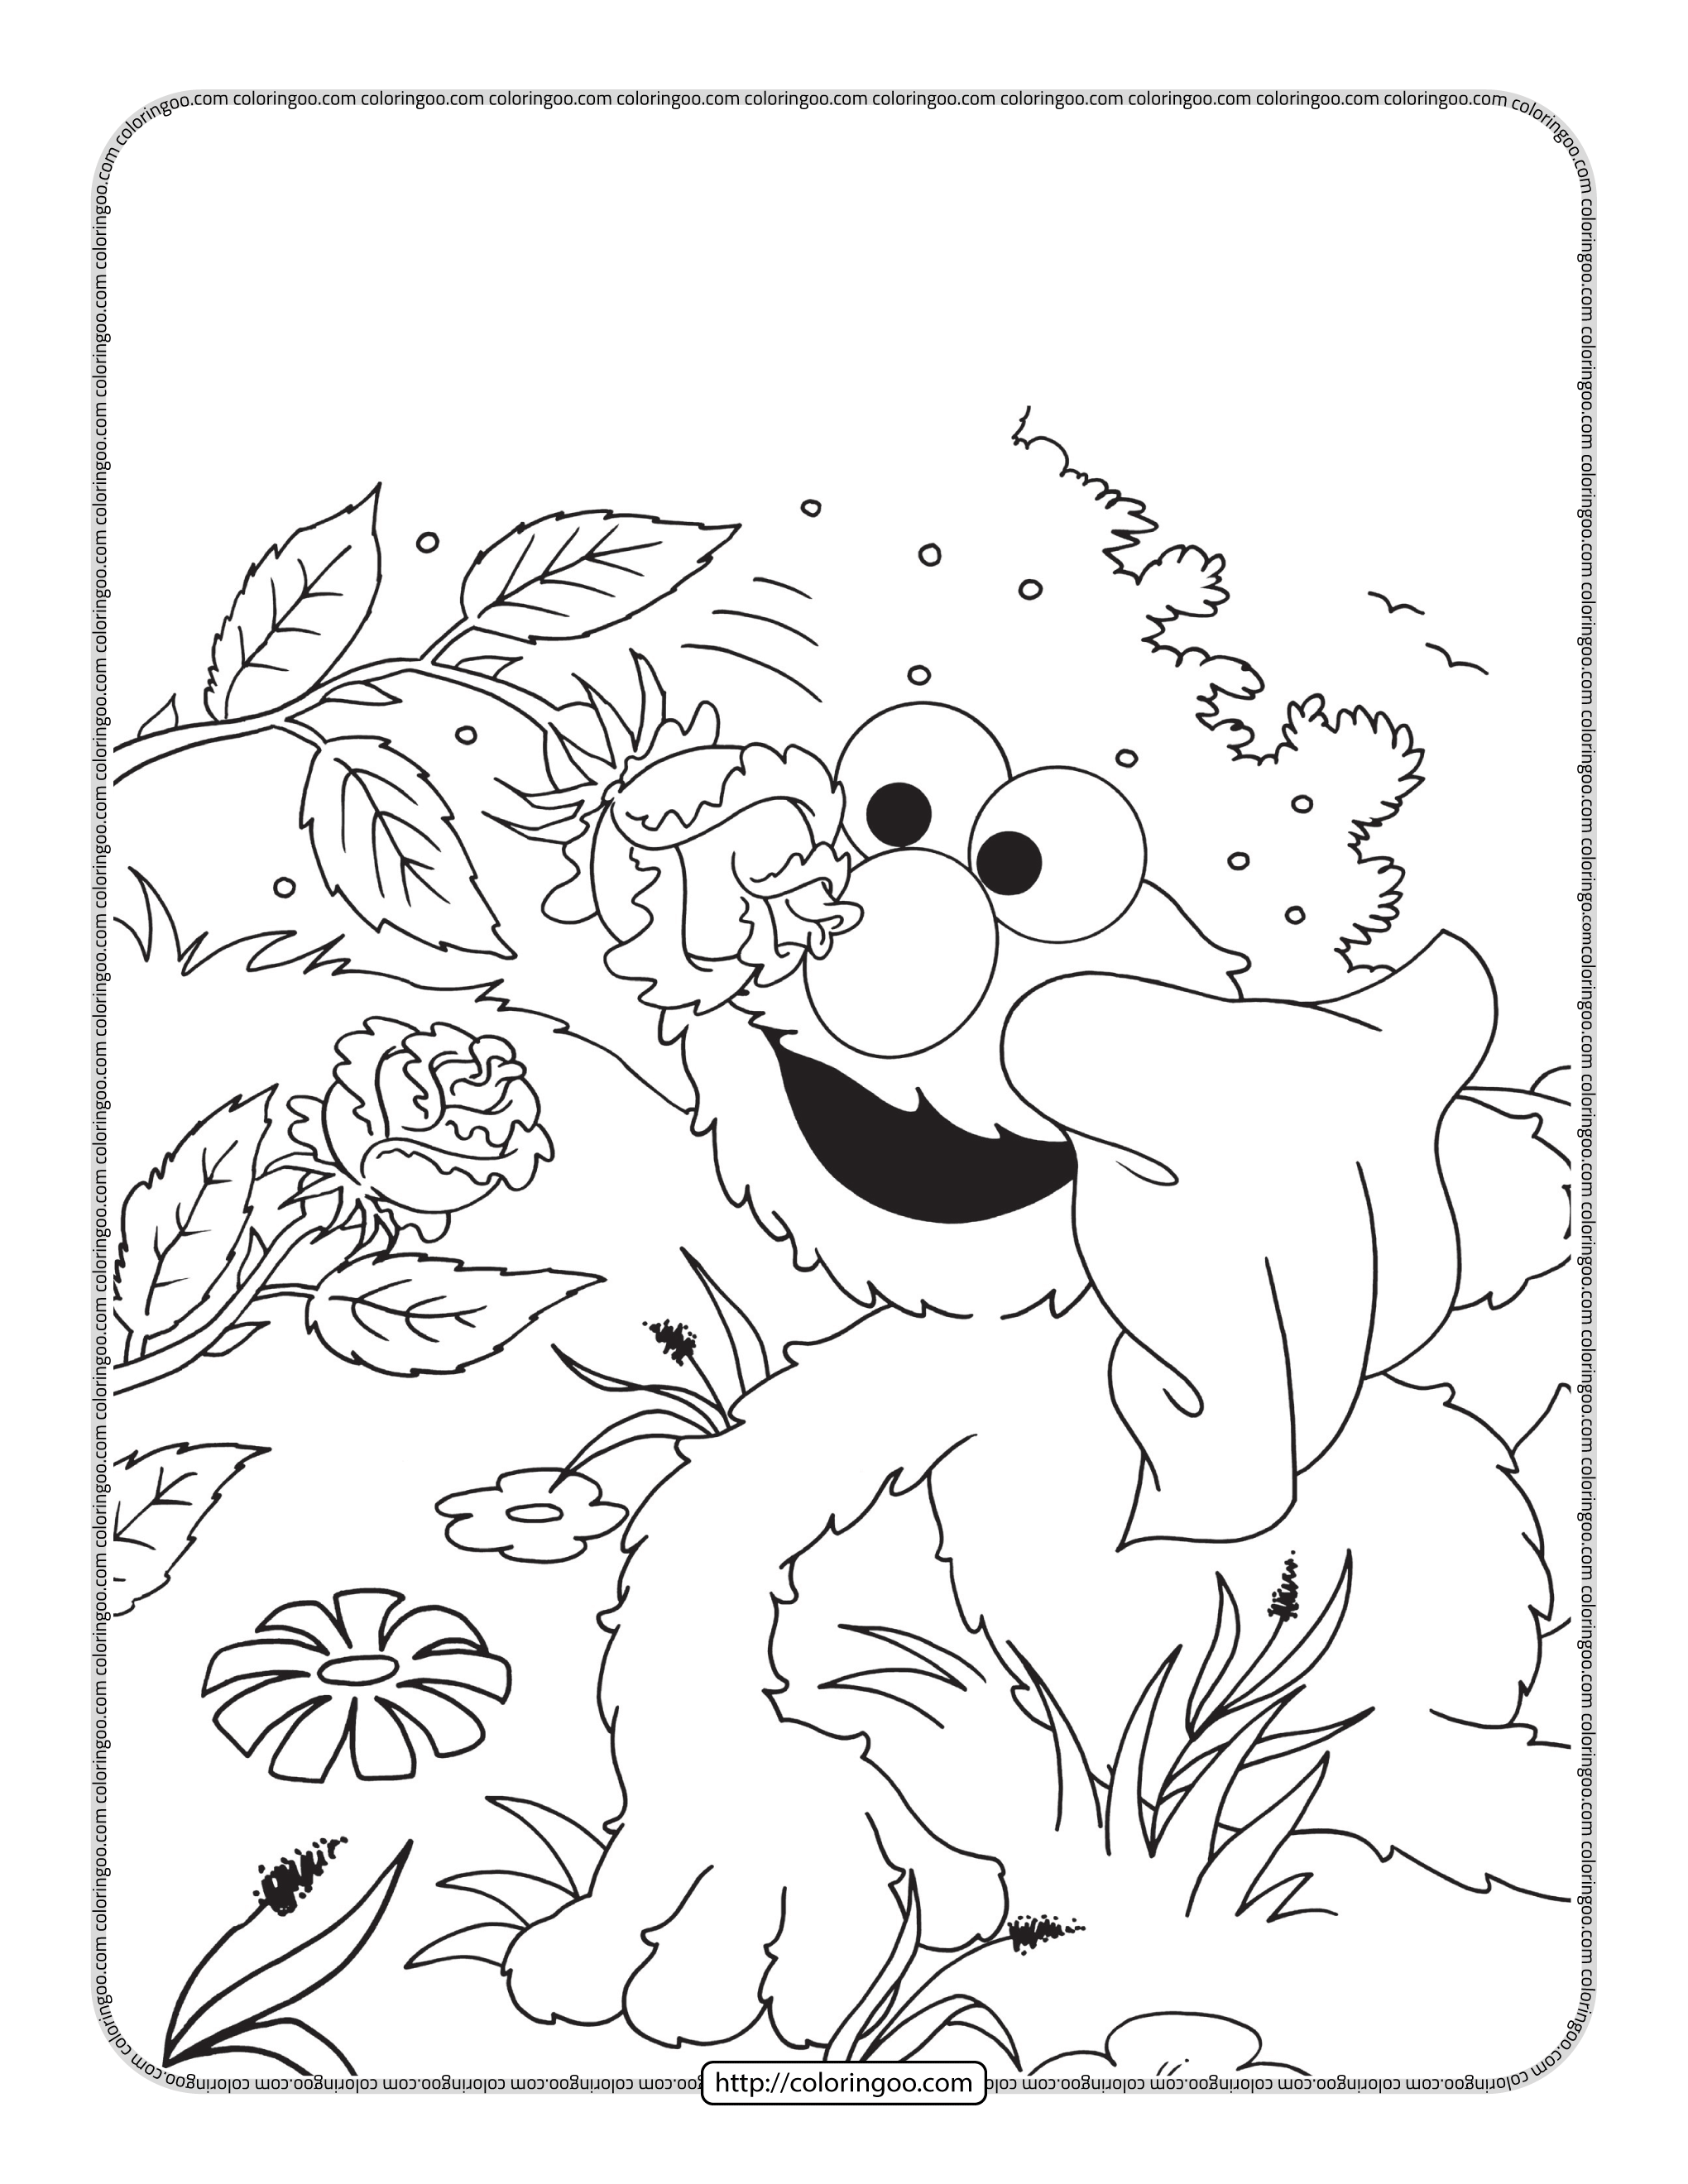 elmo in the garden coloring page